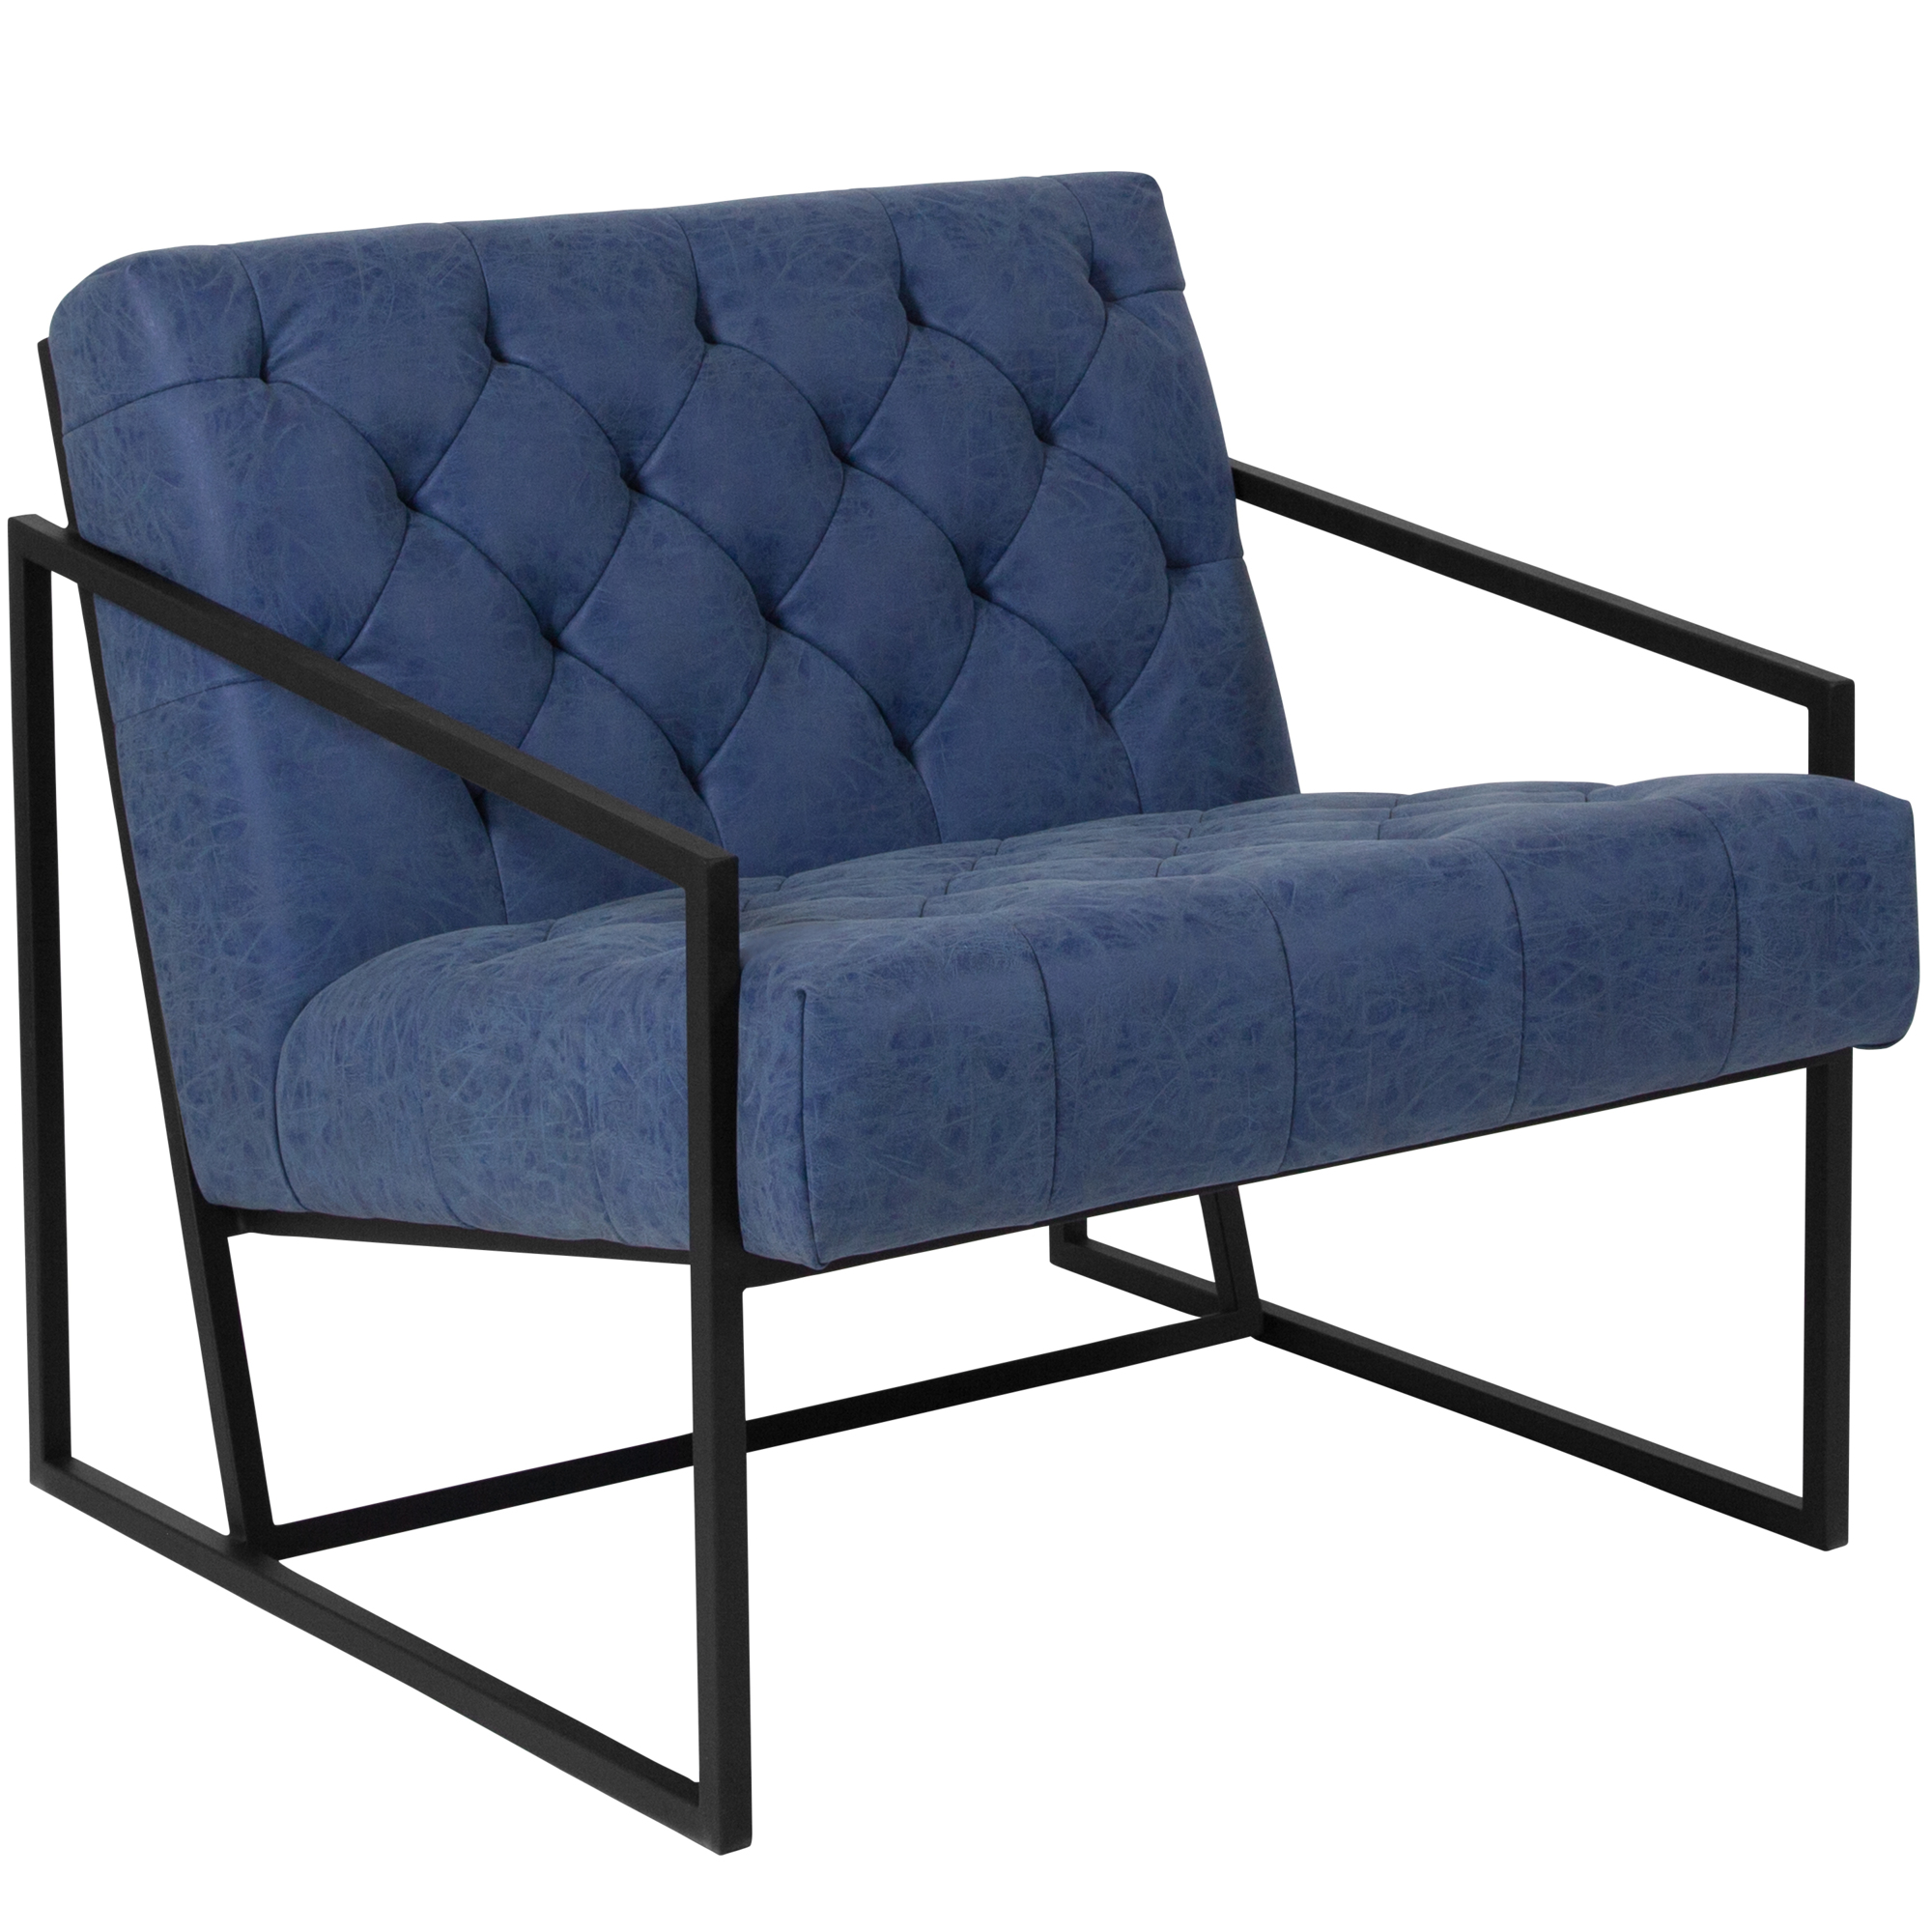 Flash Furniture, Retro Blue LeatherSoft Tufted Lounge Chair, Primary Color Blue, Included (qty.) 1, Model ZB8522BL